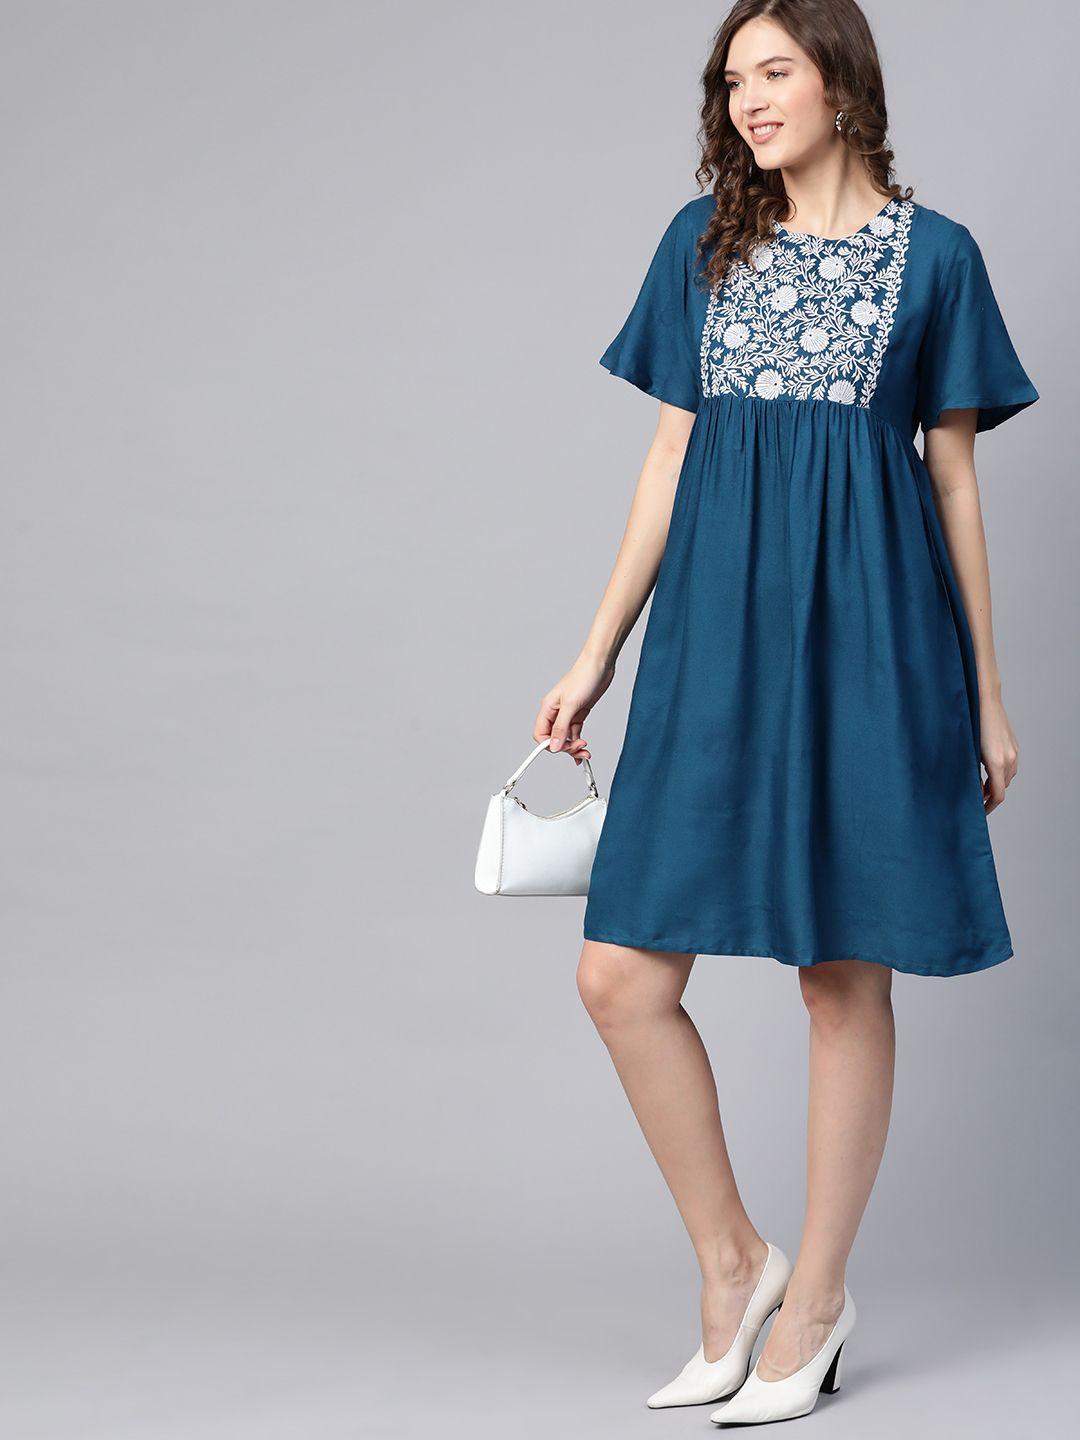 here&now navy blue & off white ethnic motifs a-line dress